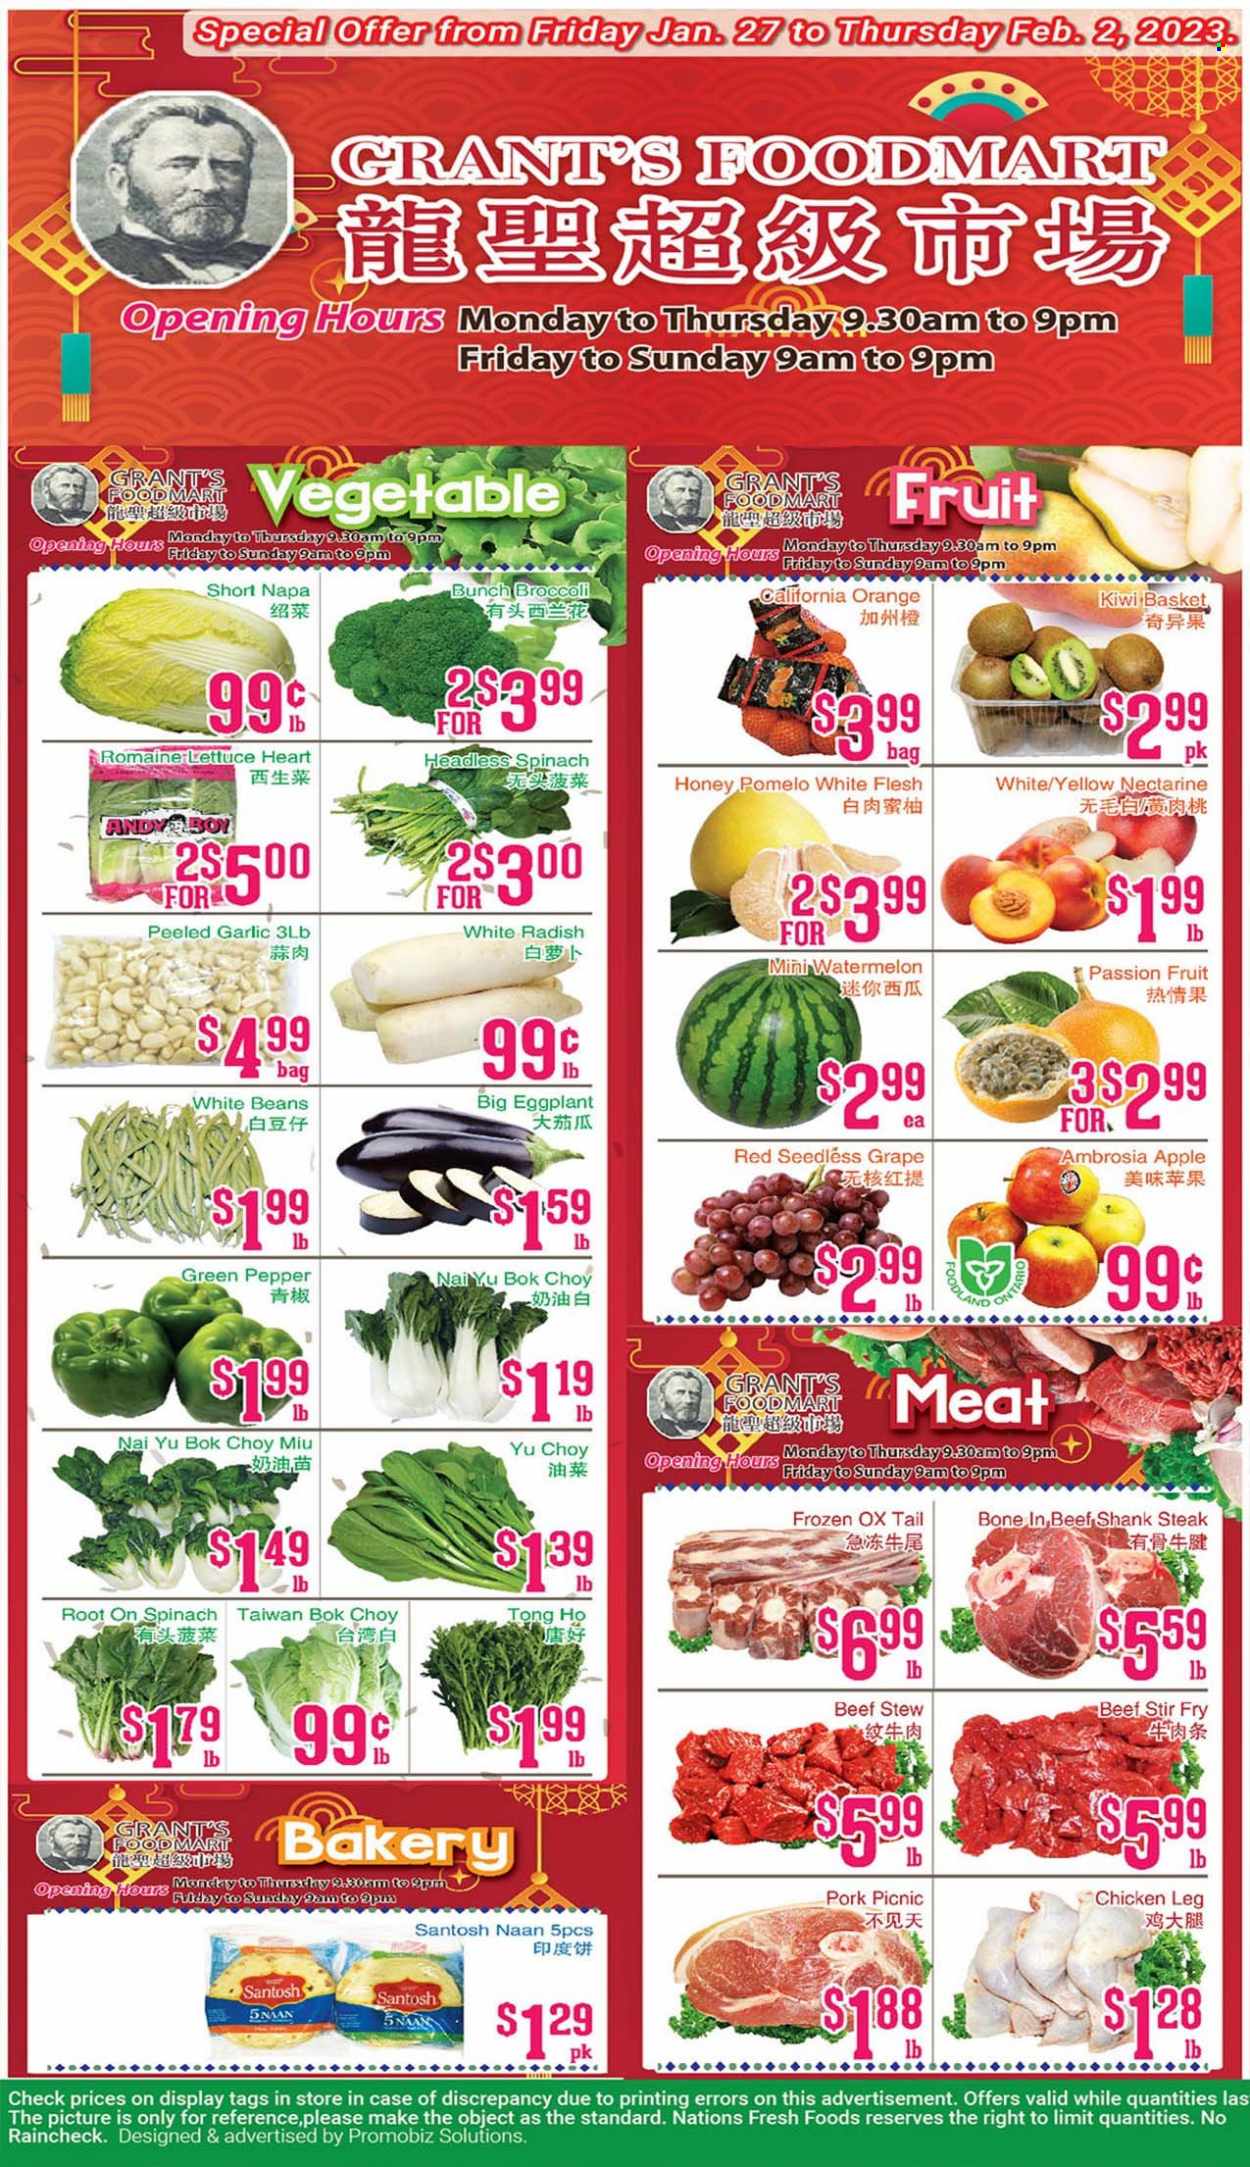 thumbnail - Grant's Foodmart Flyer - January 27, 2023 - February 02, 2023 - Sales products - beans, bok choy, broccoli, garlic, radishes, spinach, lettuce, eggplant, white radish, green pepper, nectarines, watermelon, oranges, pomelo, honey, Grant's, chicken legs, beef meat, beef shank, bag, kiwi, steak. Page 1.